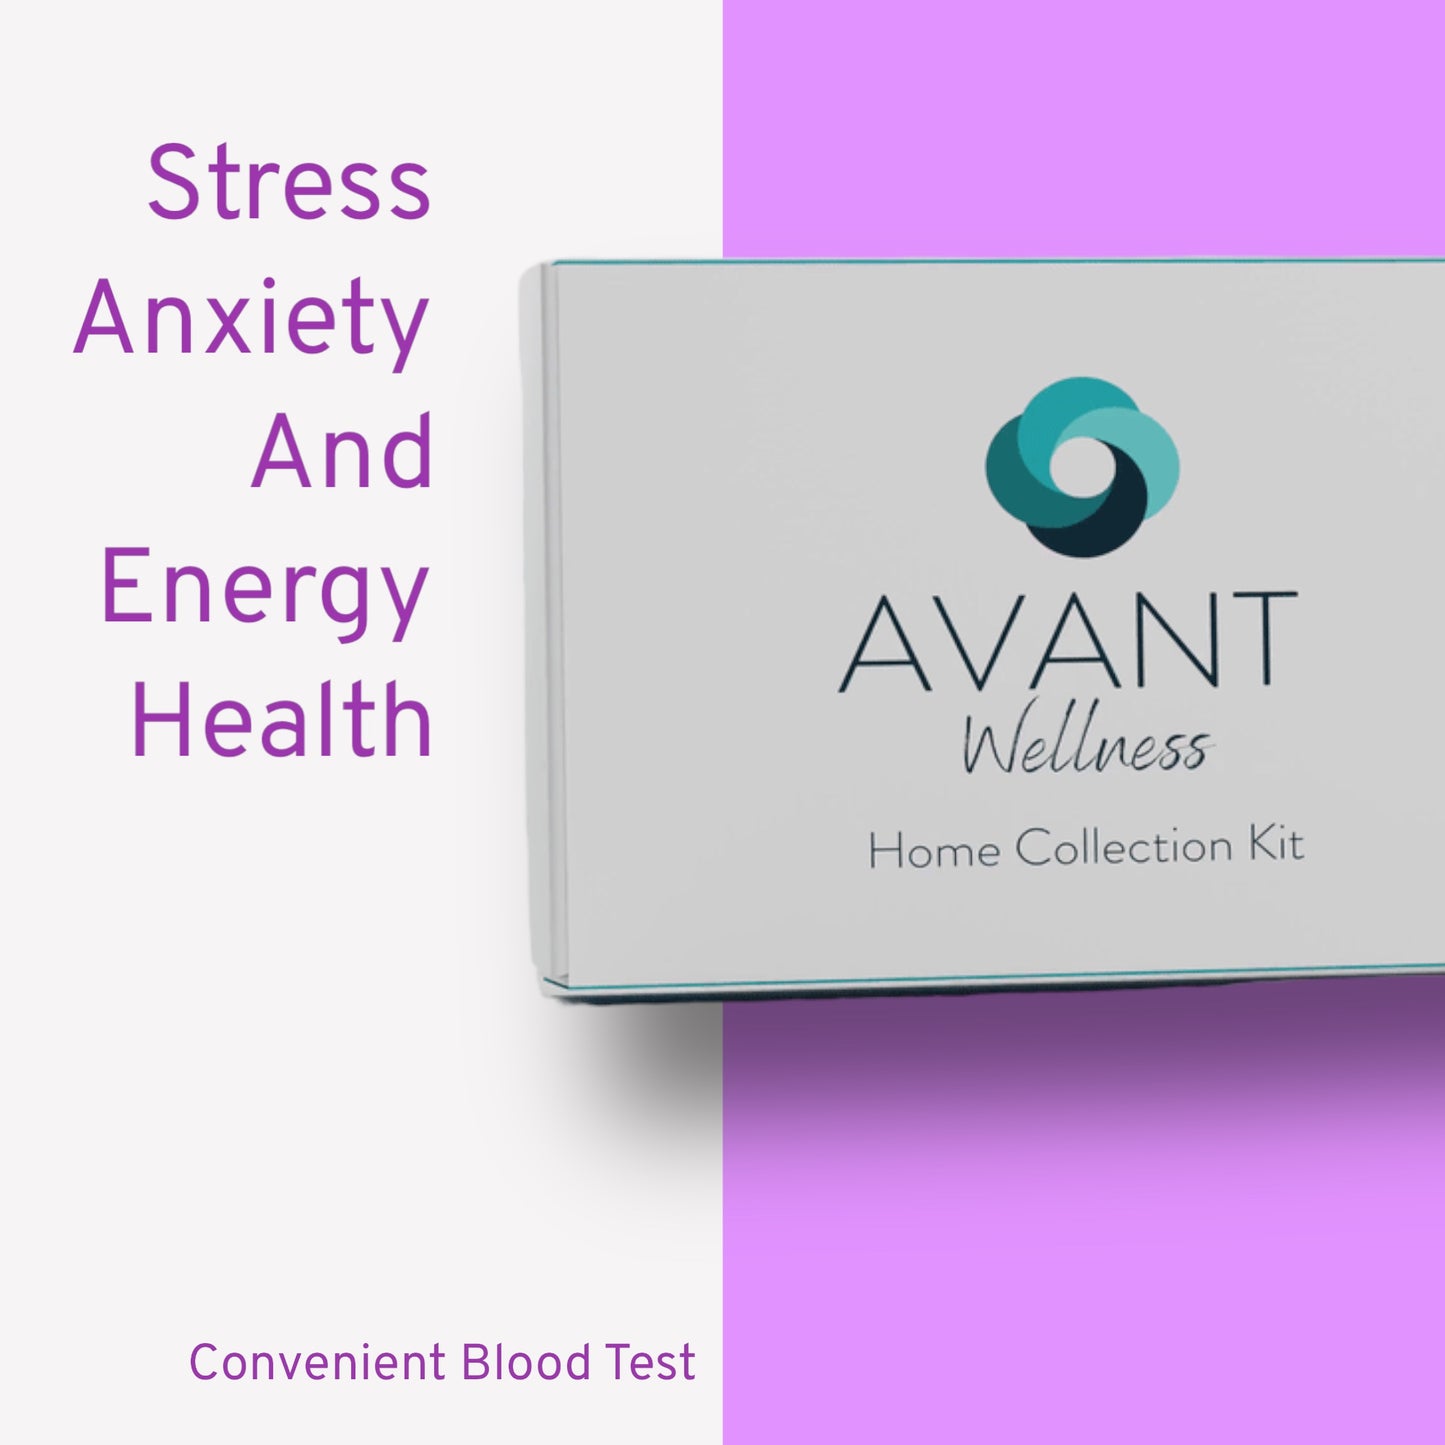 Home Collection Kit (Stress, Anxiety & Energy Test)